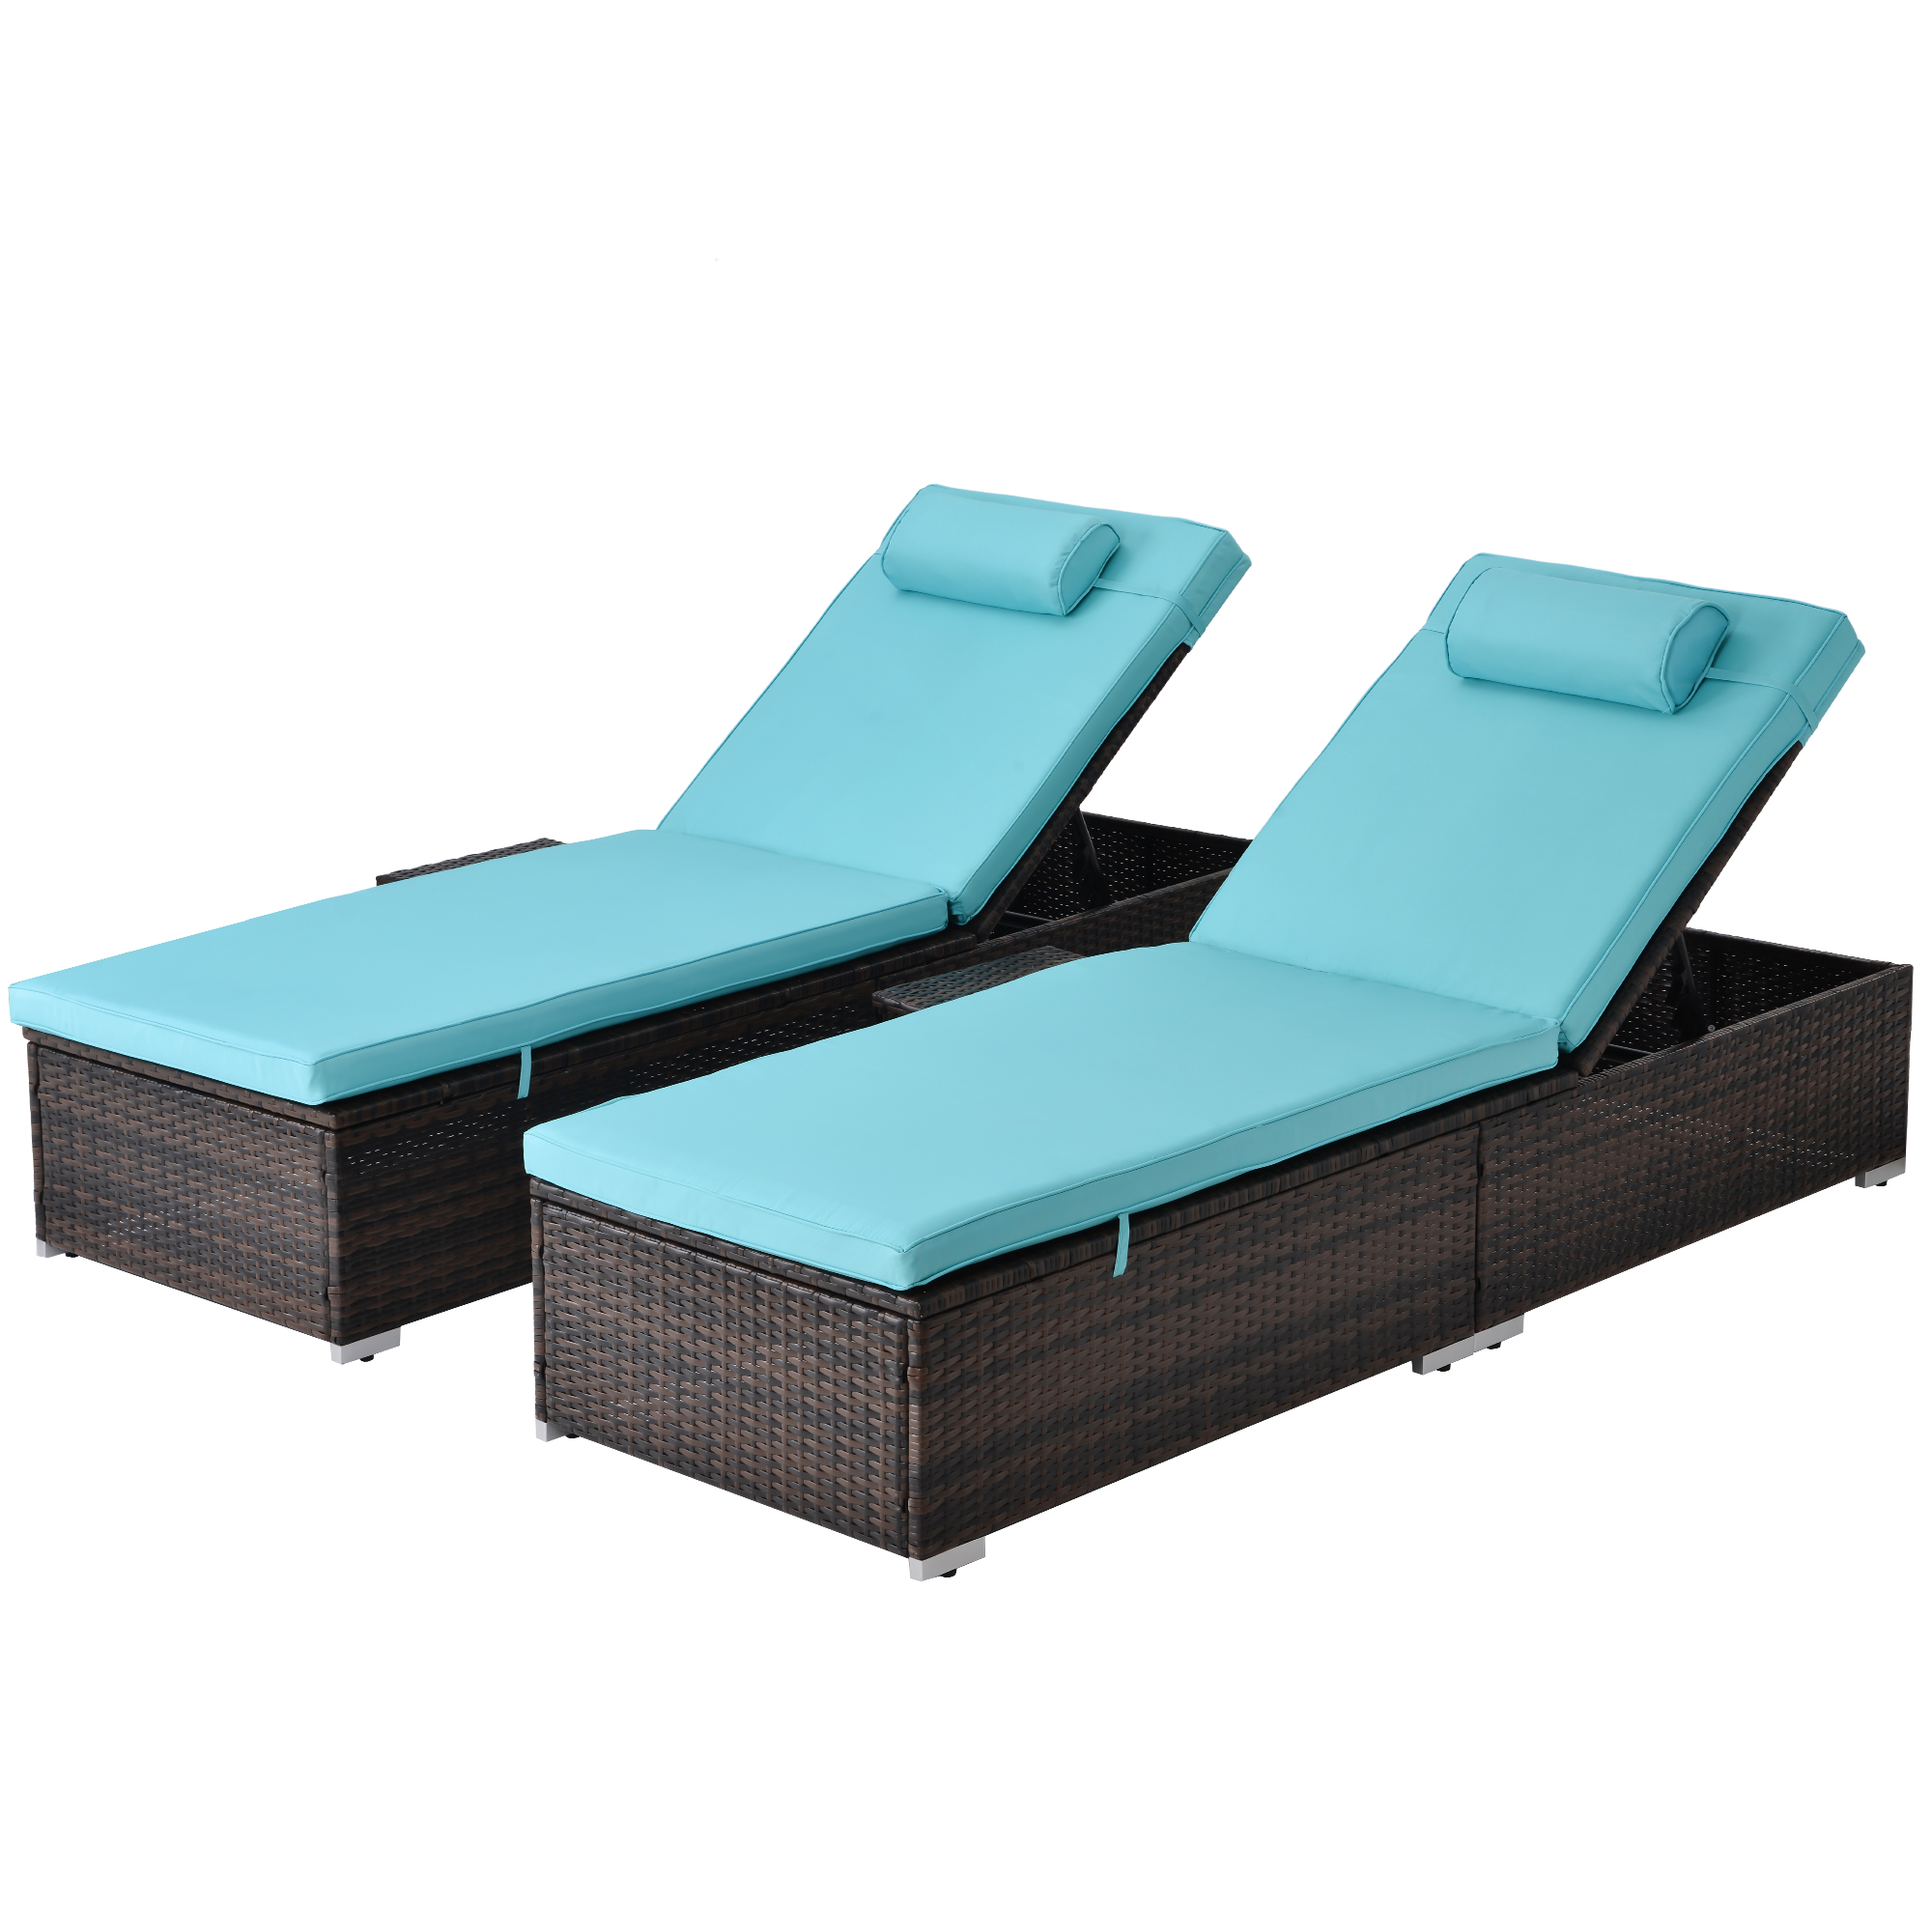 Set of 2 Rattan Chaise Lounge Chairs with Side Table, Outdoor Reclining Chairs Set W/Adjustable Backrest, Cushions and Head Pillow, Chaise Lounge Furniture Set for Poolside Beach Garden Patio, B66 - image 4 of 11